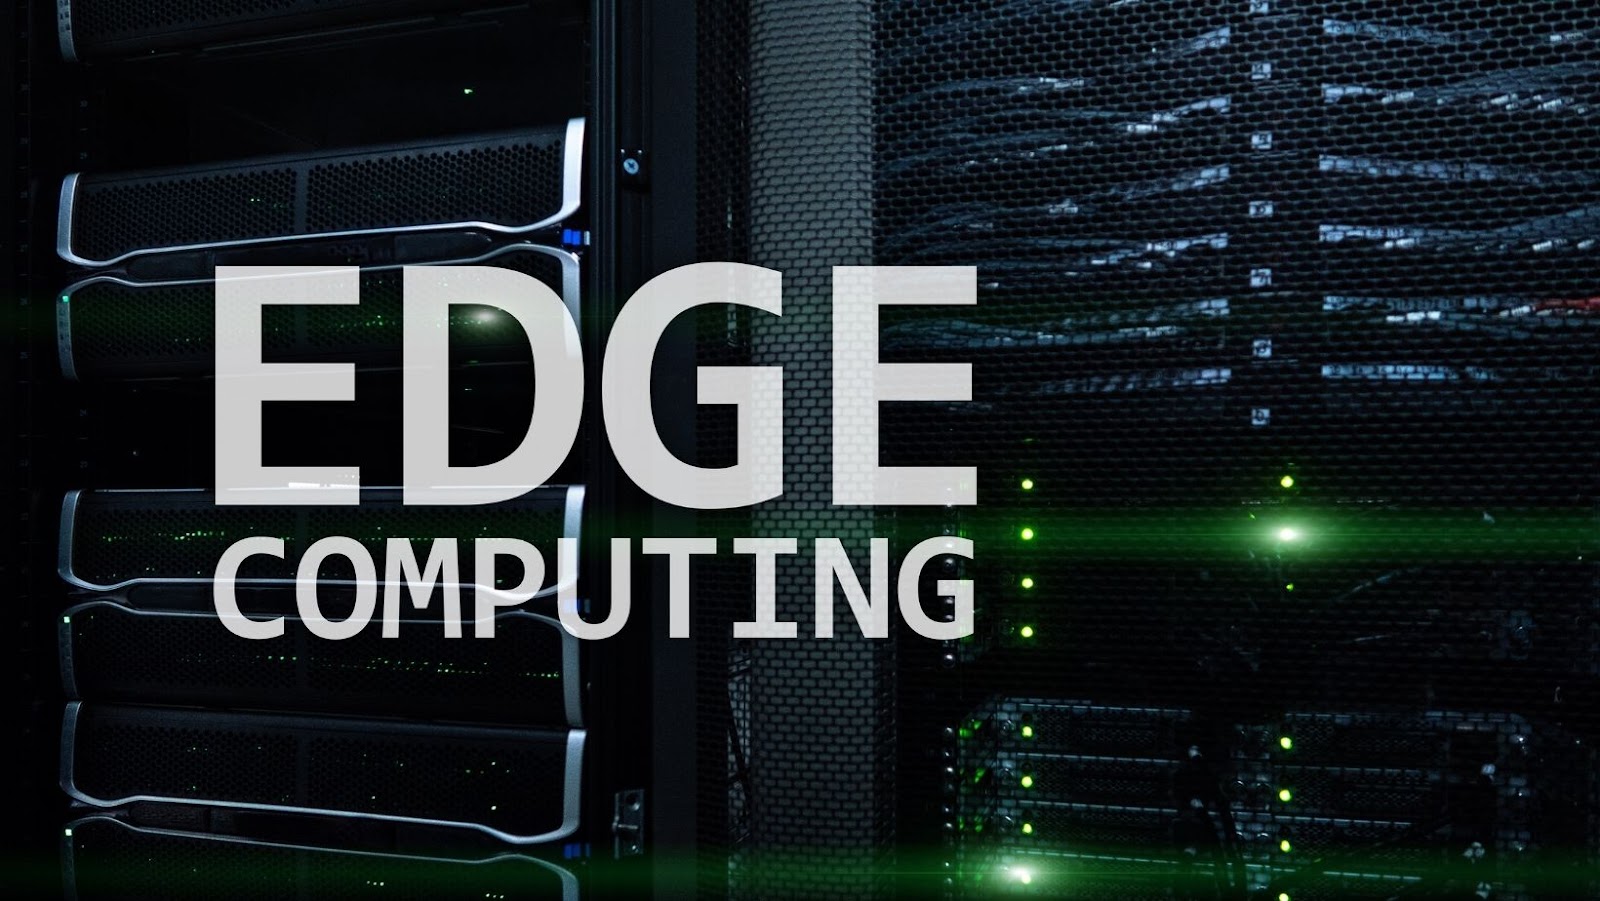 The Ultimate Guide to Edge Computing: What Would be an Ideal Scenario for Using It?